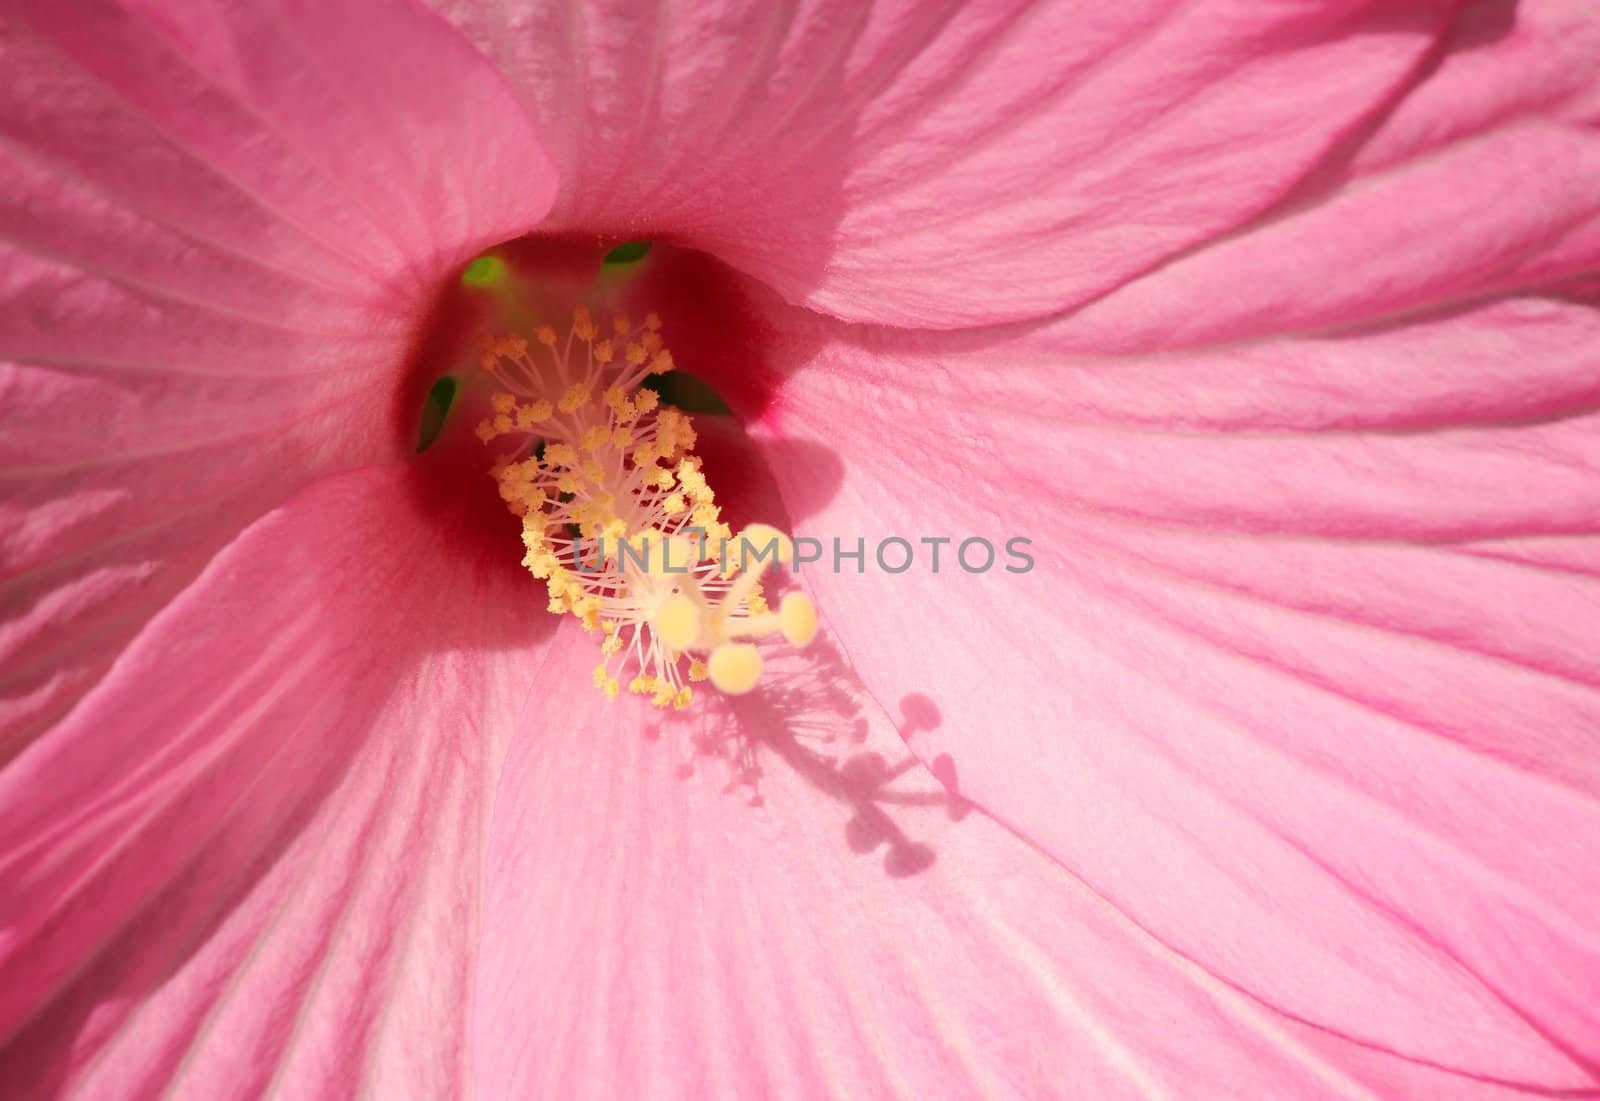 close to the petal and stamen from althaea.